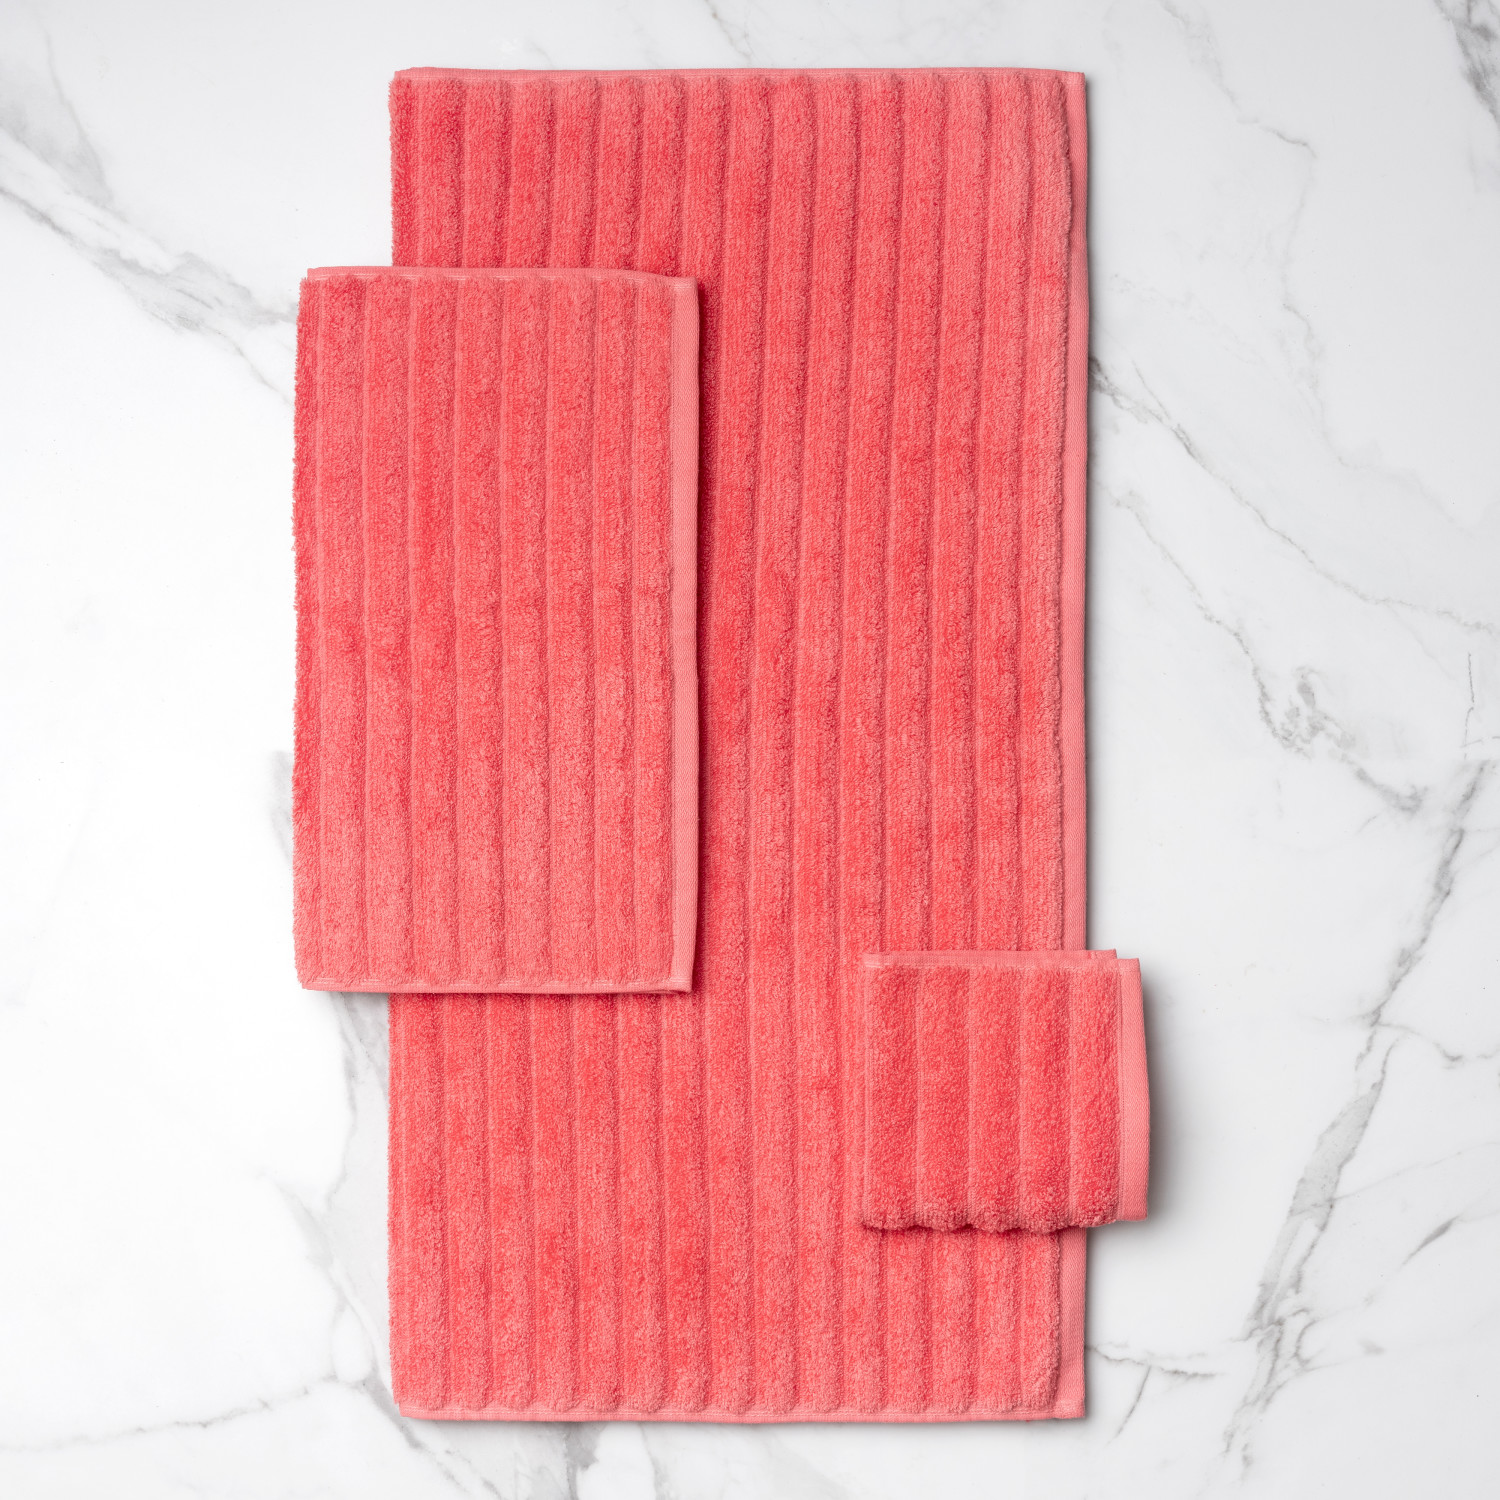 Mainstays Performance 6-Piece Towel Set, Textured Island Coral - image 3 of 7